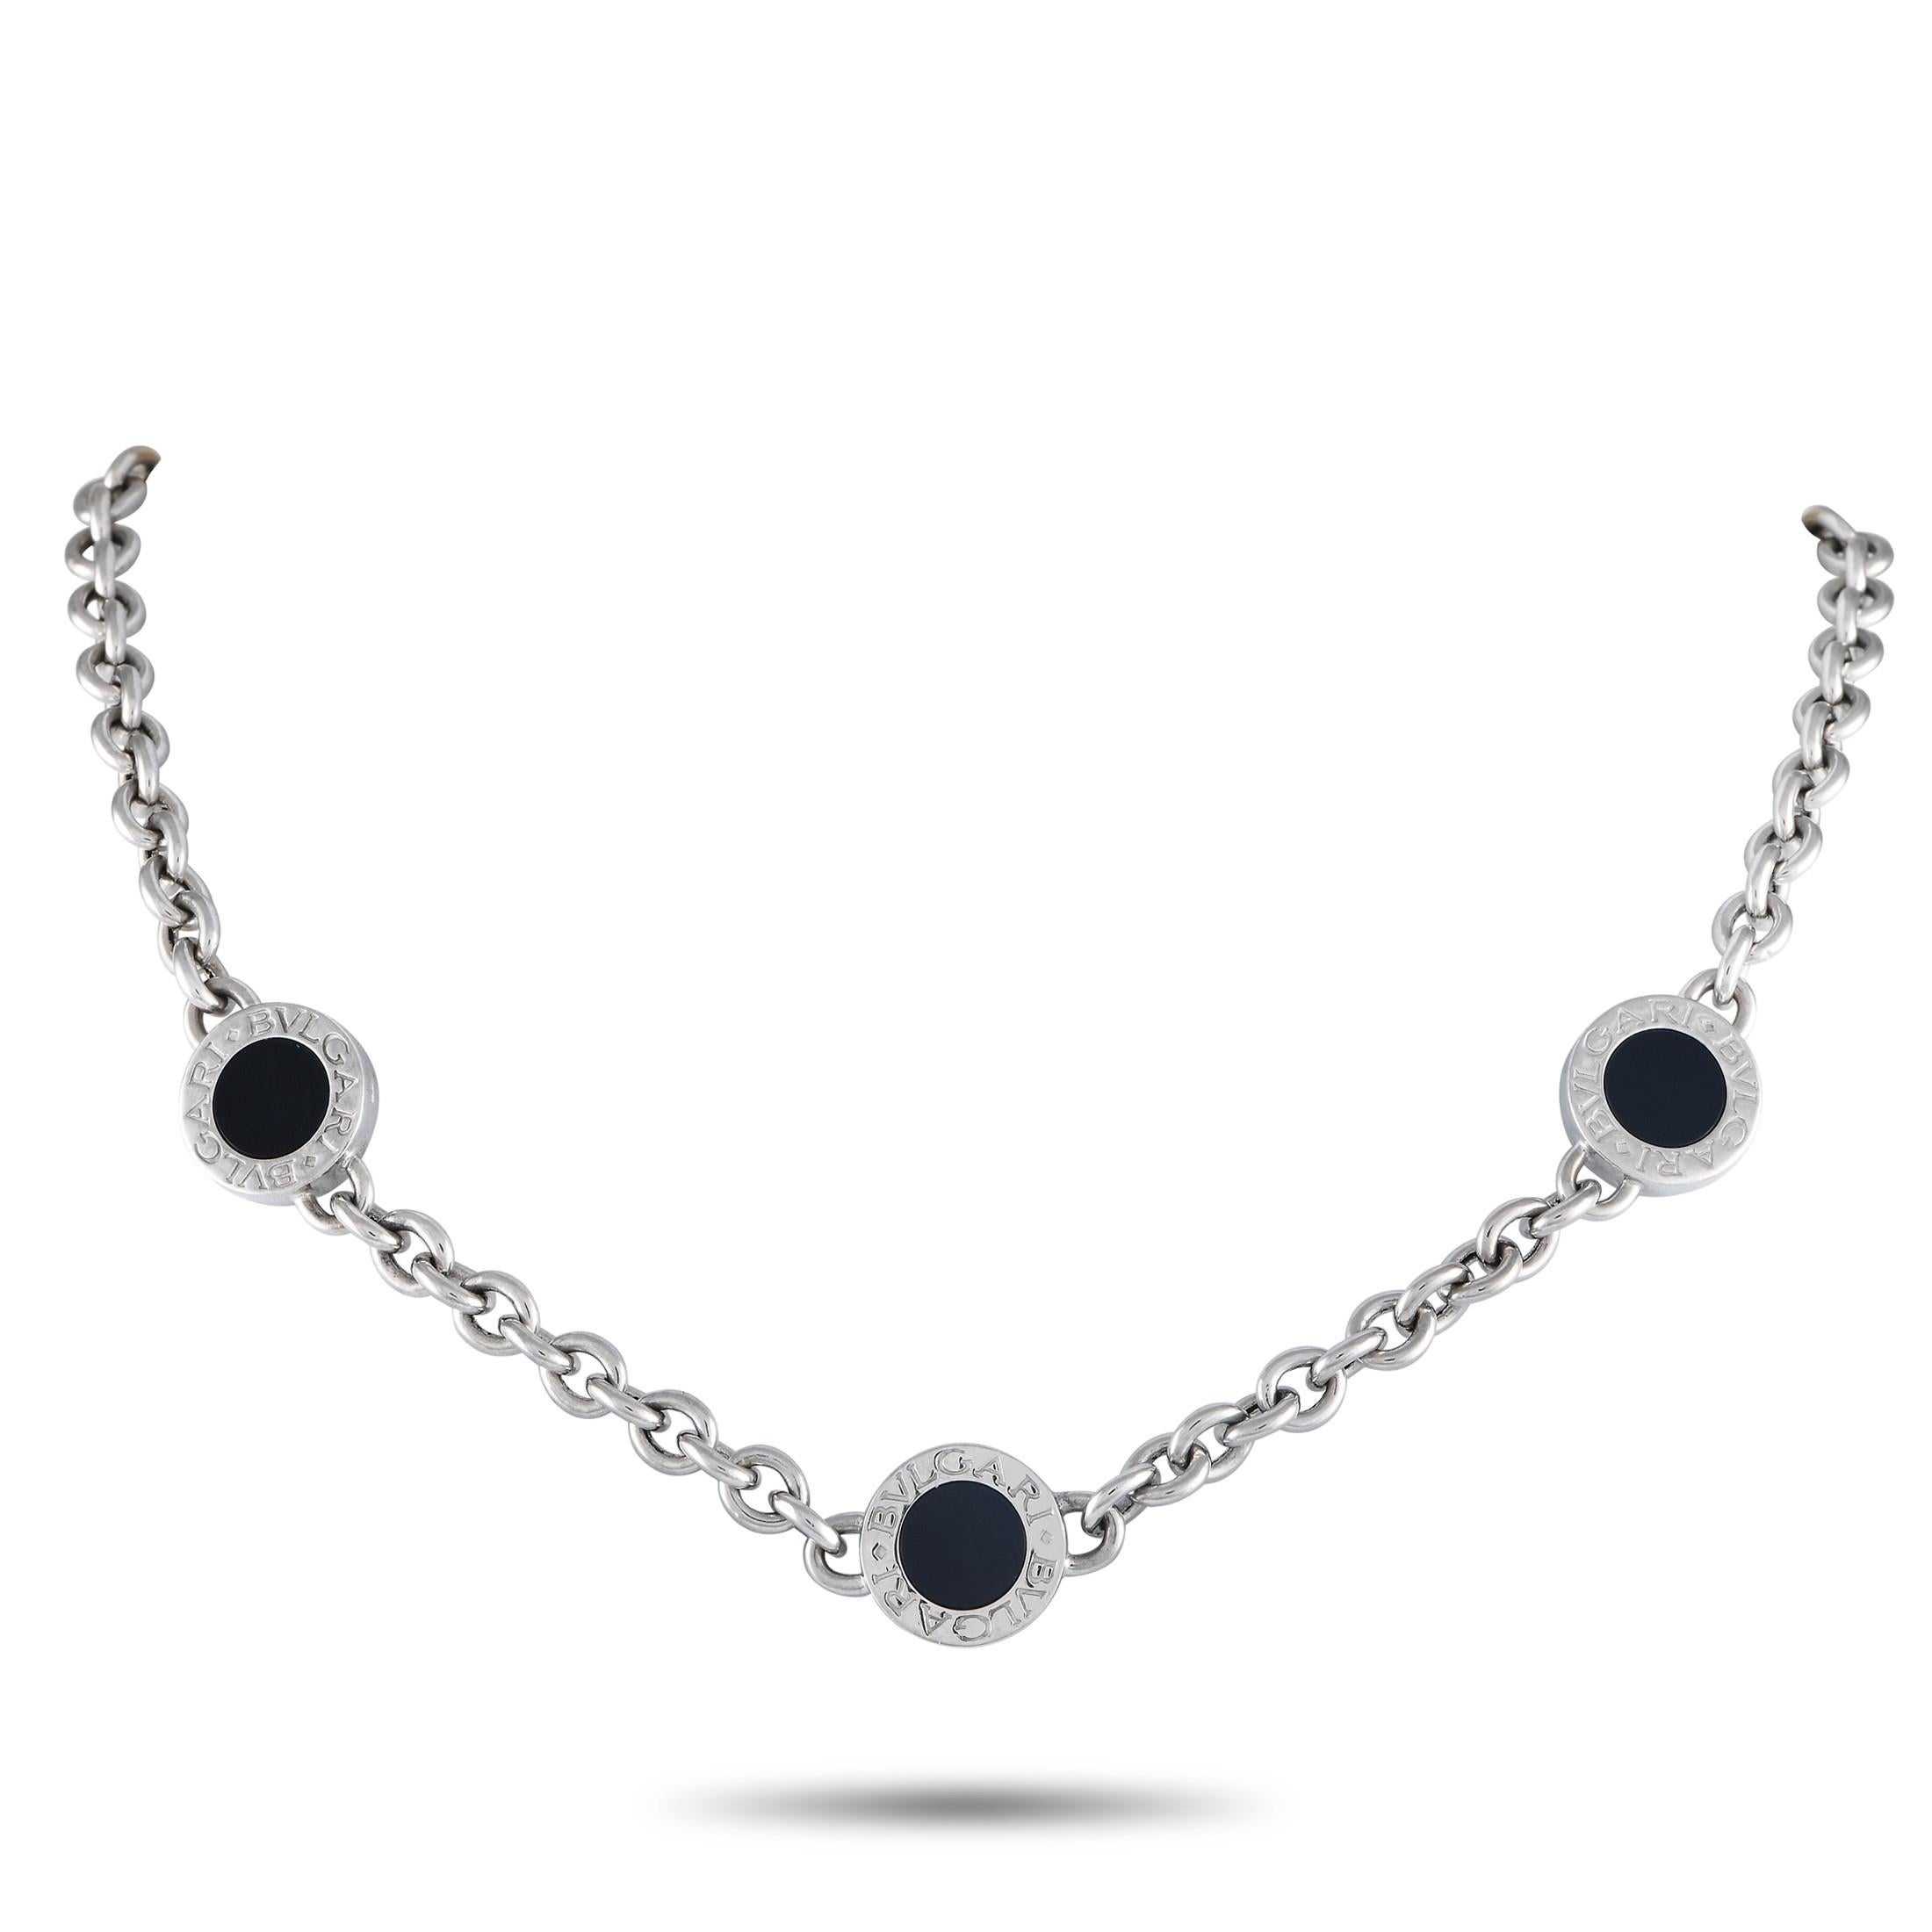 Bvlgari Bvlgari 18K White Gold Triple Onyx Chain Necklace In Excellent Condition For Sale In Southampton, PA